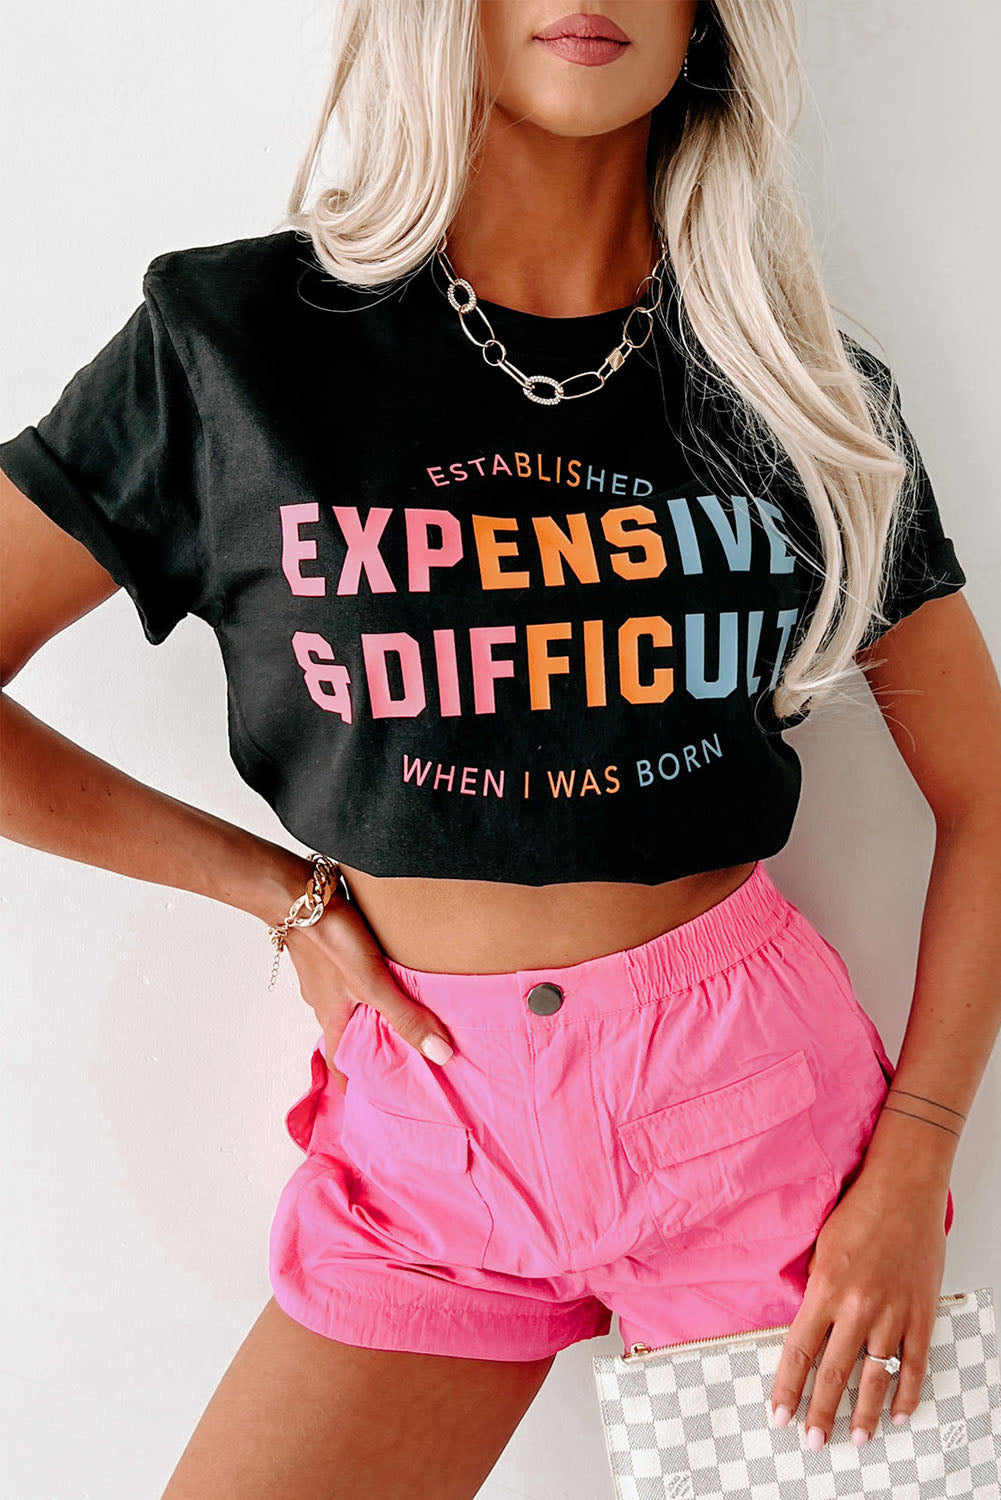 Black EXPENSIVE&DIFFICULT Graphic Tee